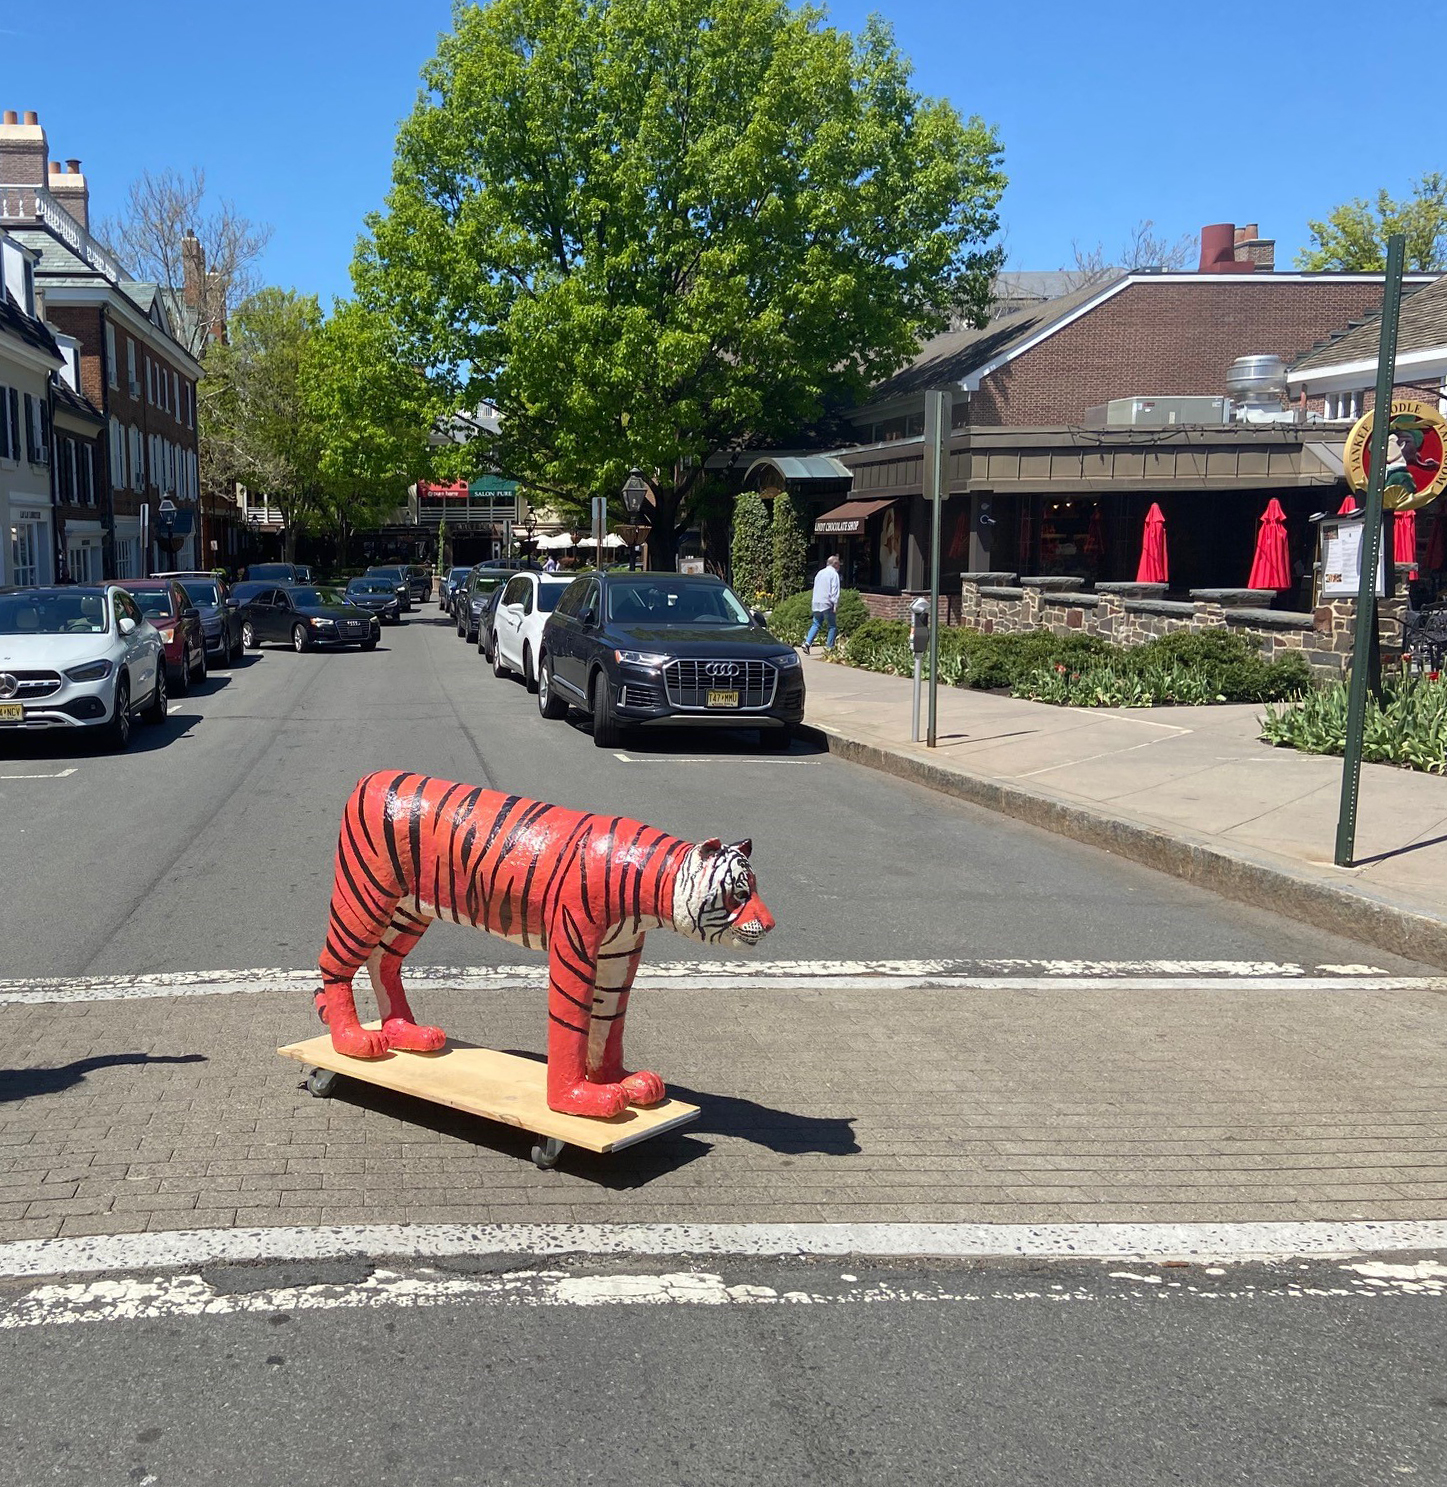 Tiger statue in middle of road